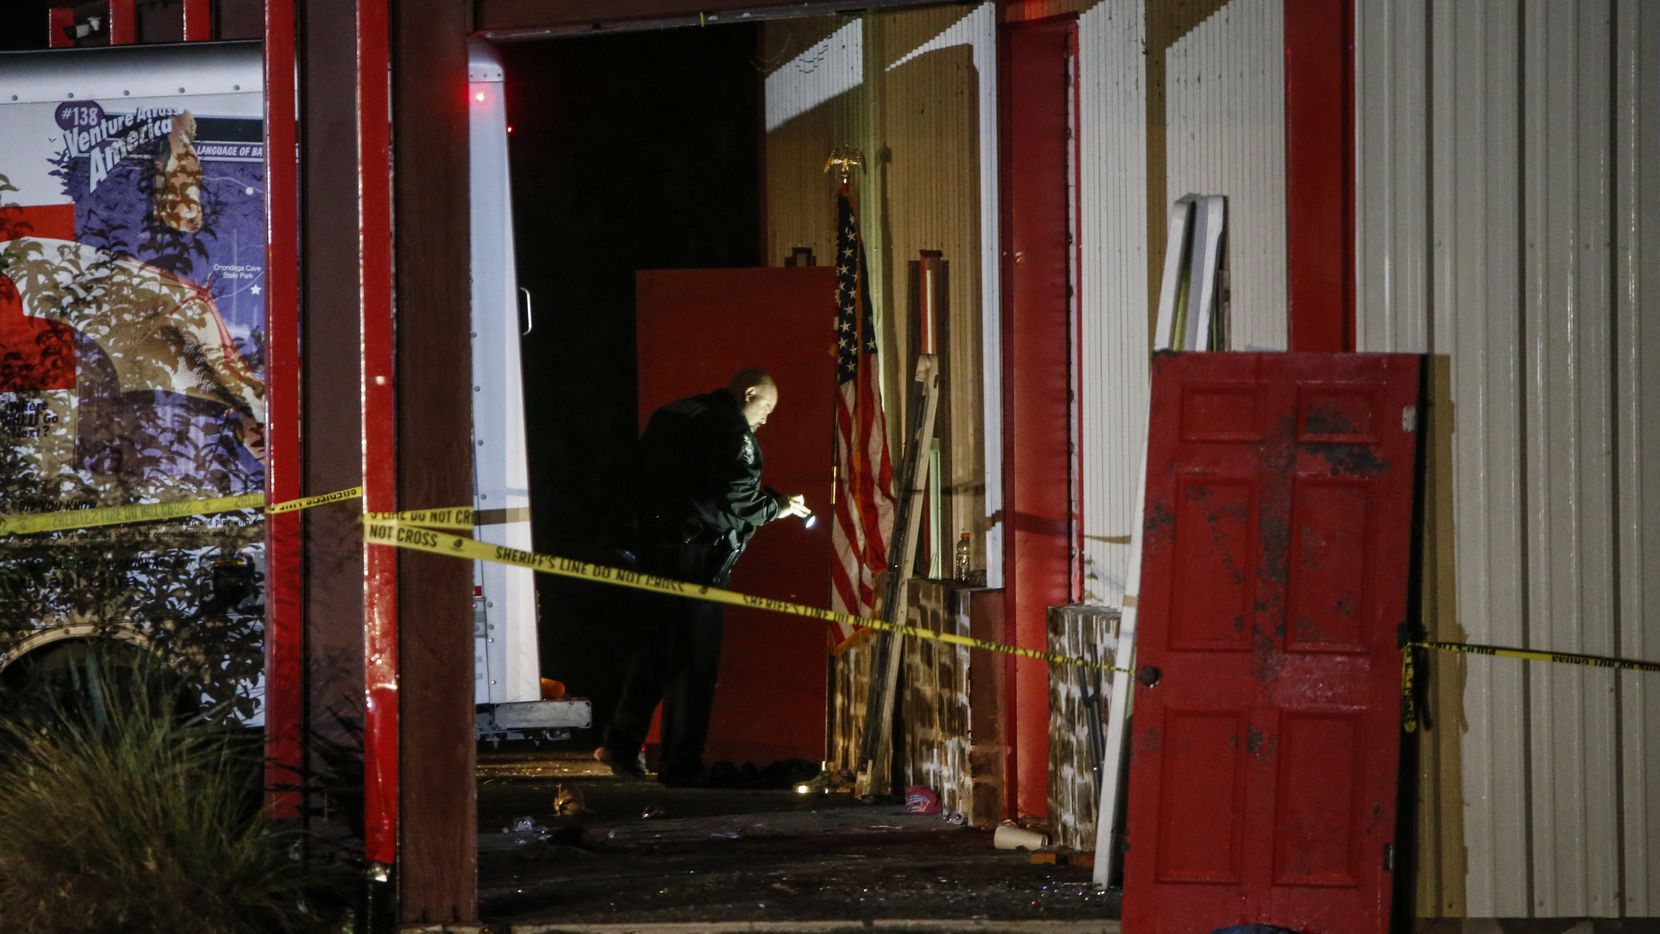 Officials work a crime scene after a shooting at Party Venue on Highway 380 in Greenville, Texas, on Sunday, October 27, 2019. As of early Sunday morning a gunman is still at large after killing at least two people and injuring 14 at Party Venue Saturday night, according to Hunt County Sheriff Randy Meeks.